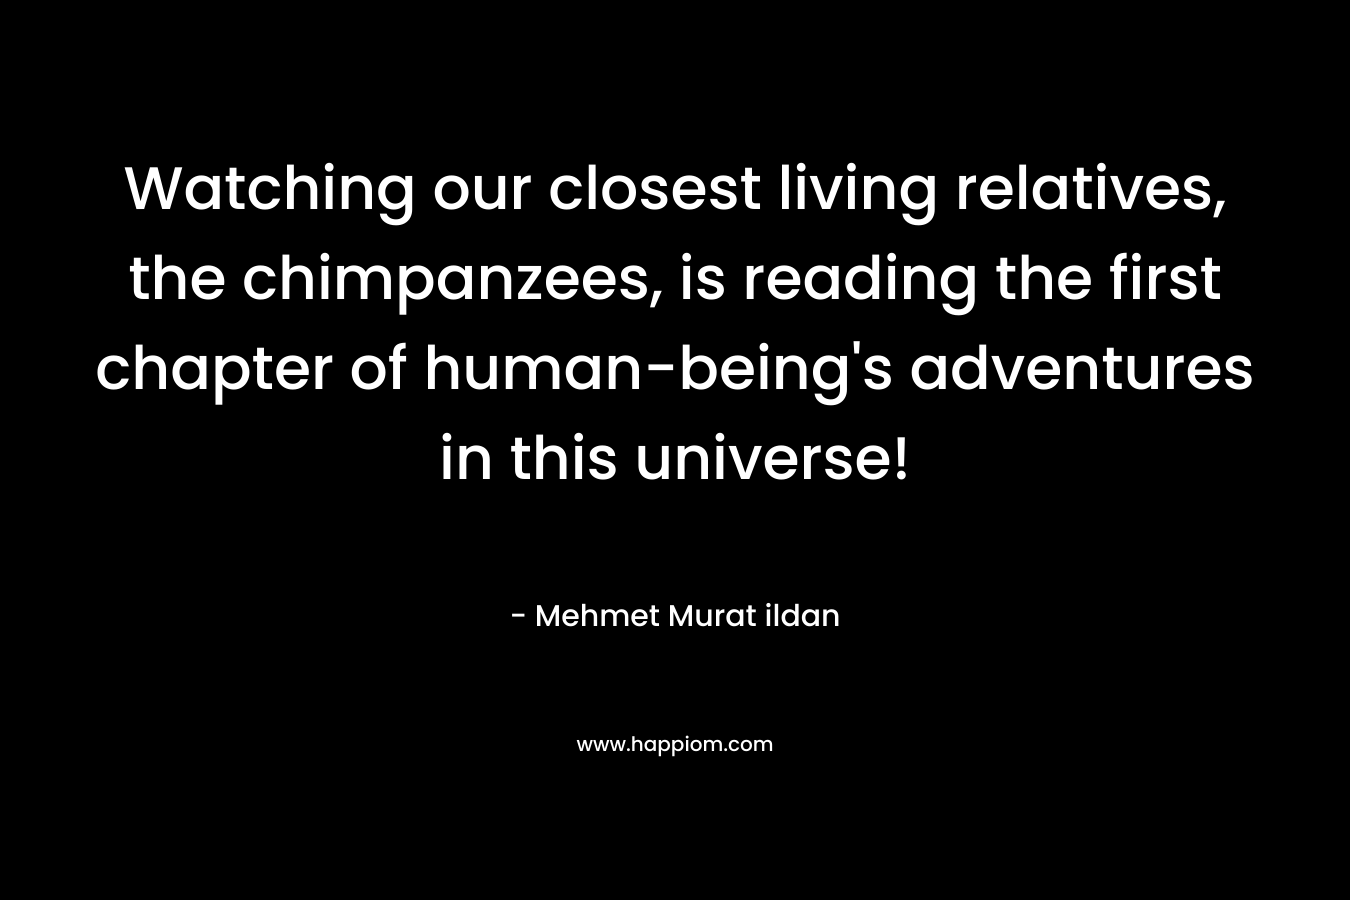 Watching our closest living relatives, the chimpanzees, is reading the first chapter of human-being's adventures in this universe!